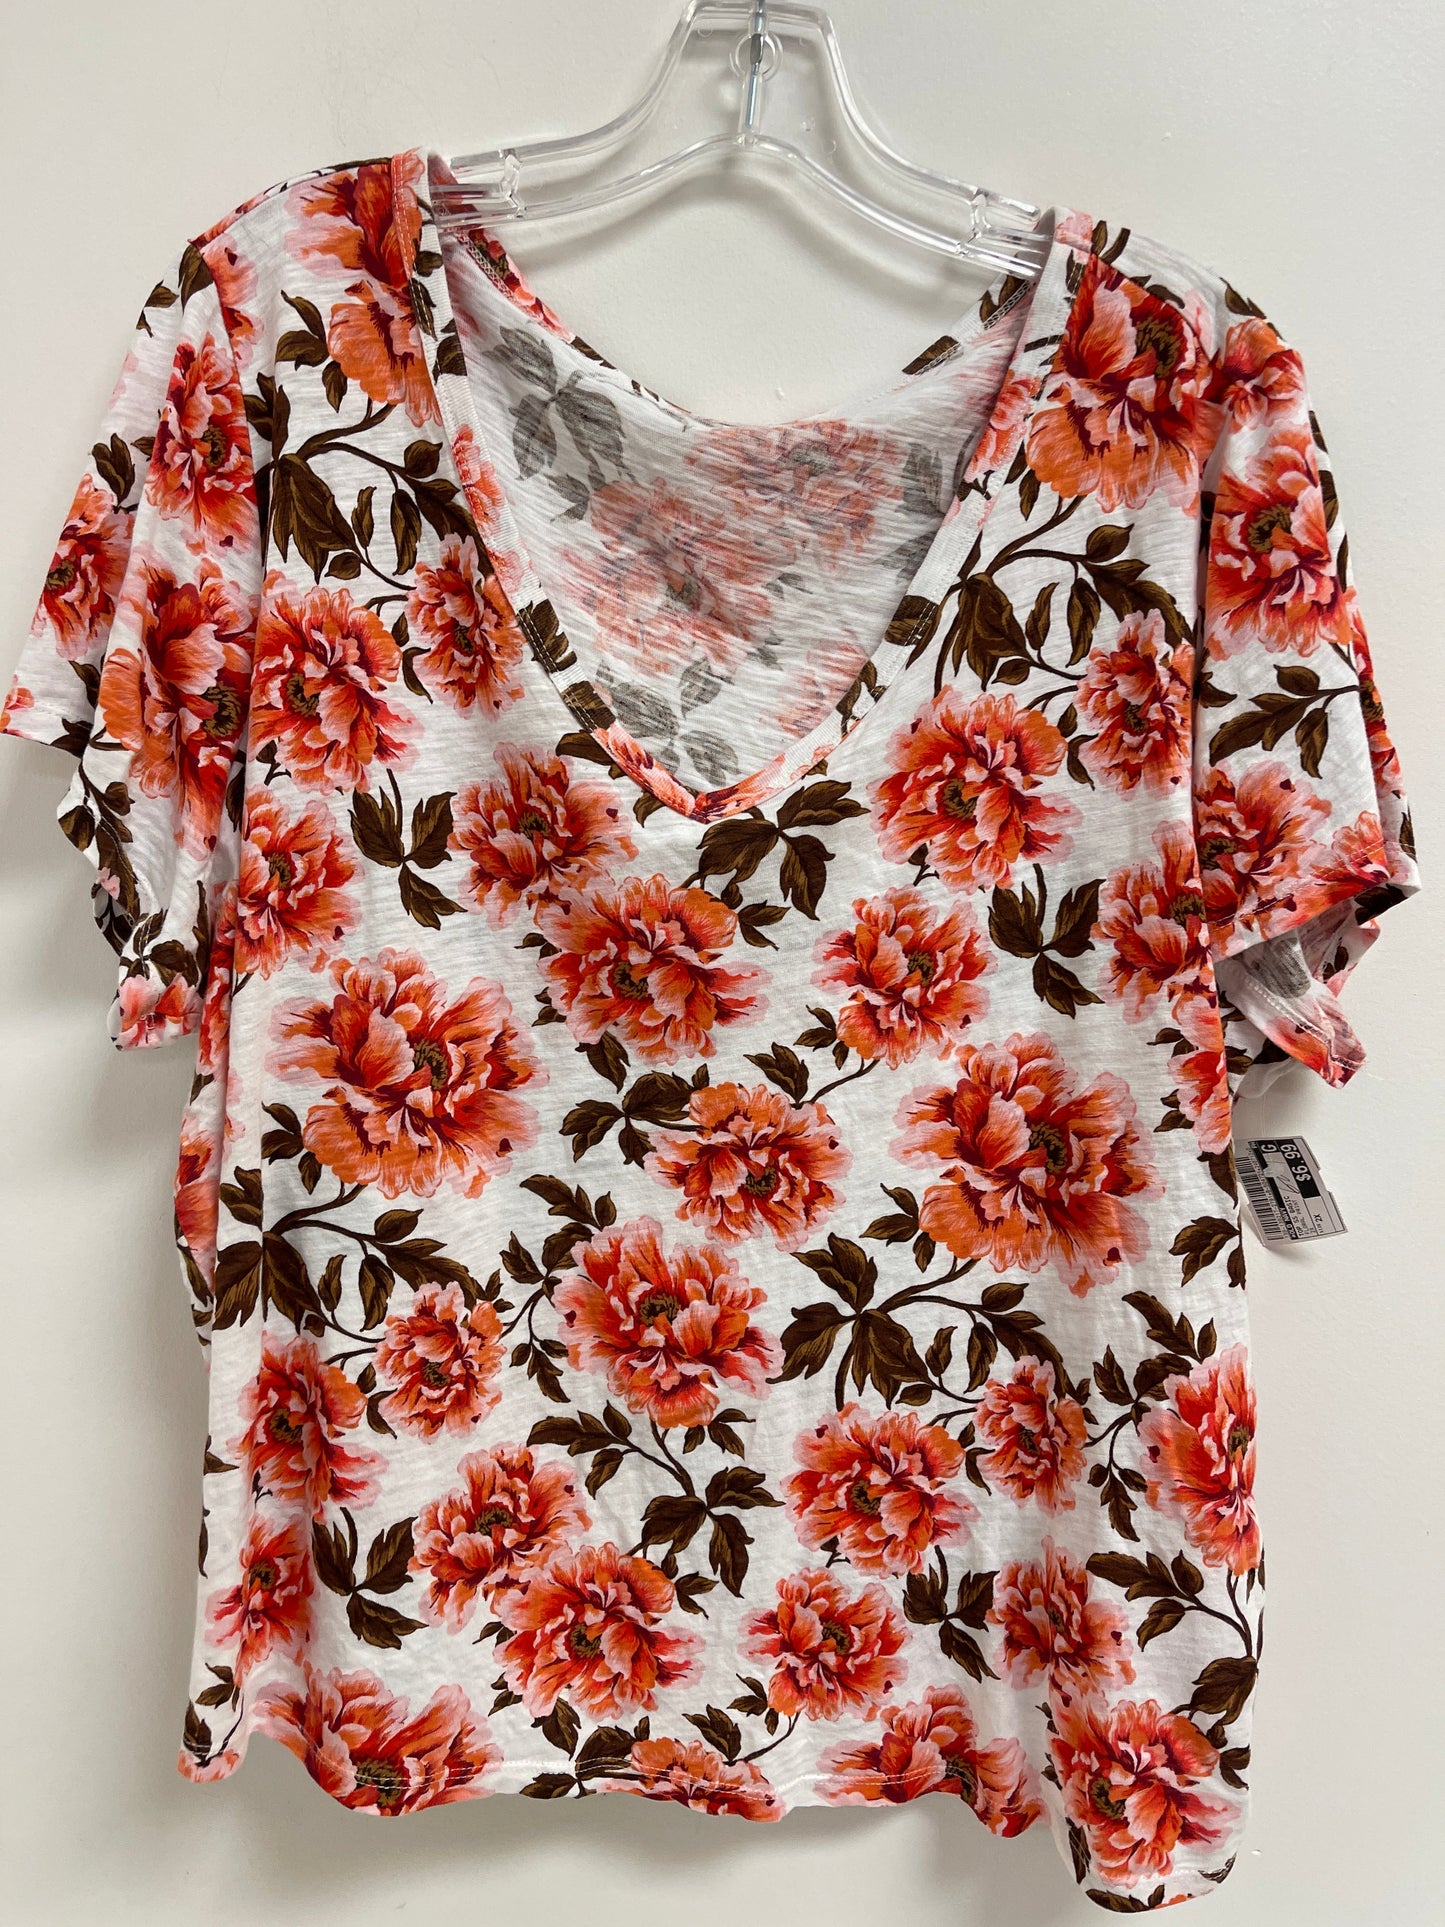 Floral Print Top Short Sleeve Basic Old Navy, Size 2x